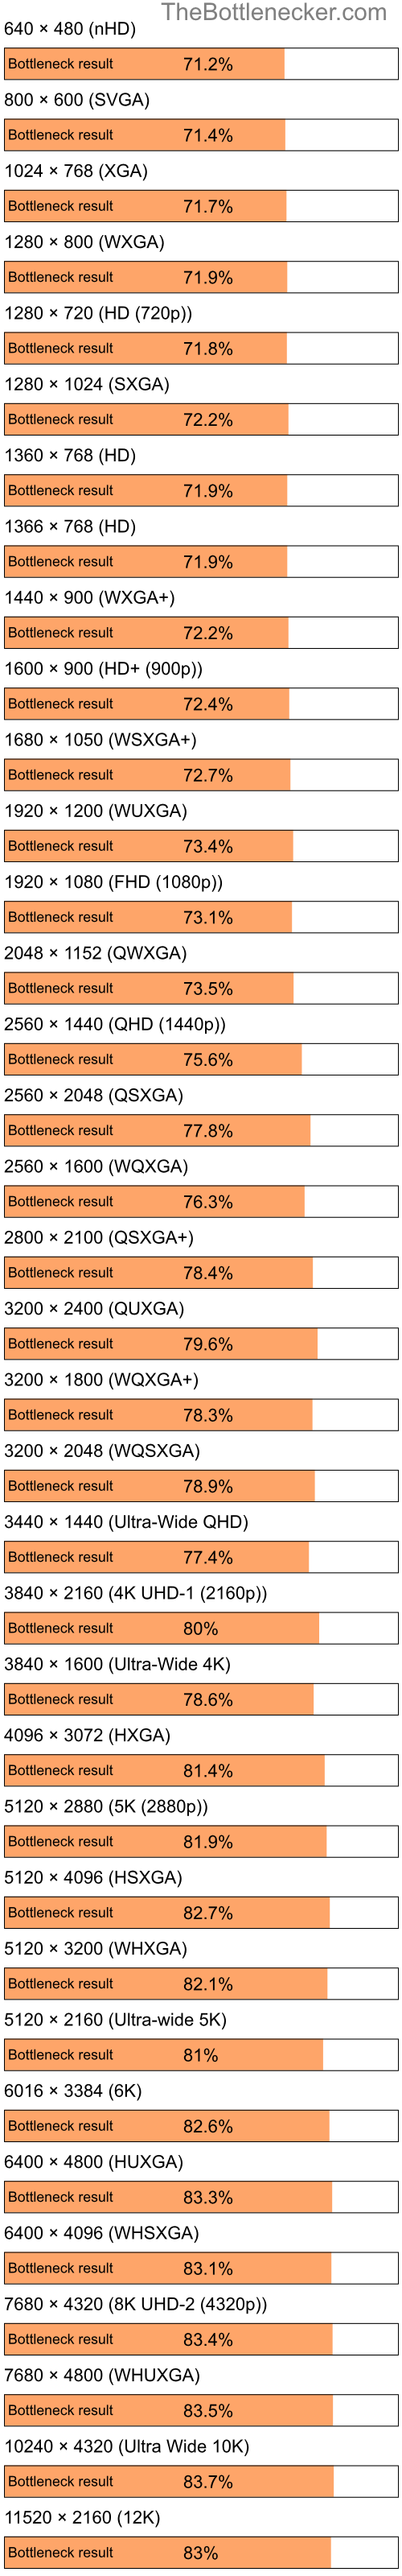 Bottleneck results by resolution for Intel Celeron and AMD M860G with Mobility Radeon 4100 in Graphic Card Intense Tasks